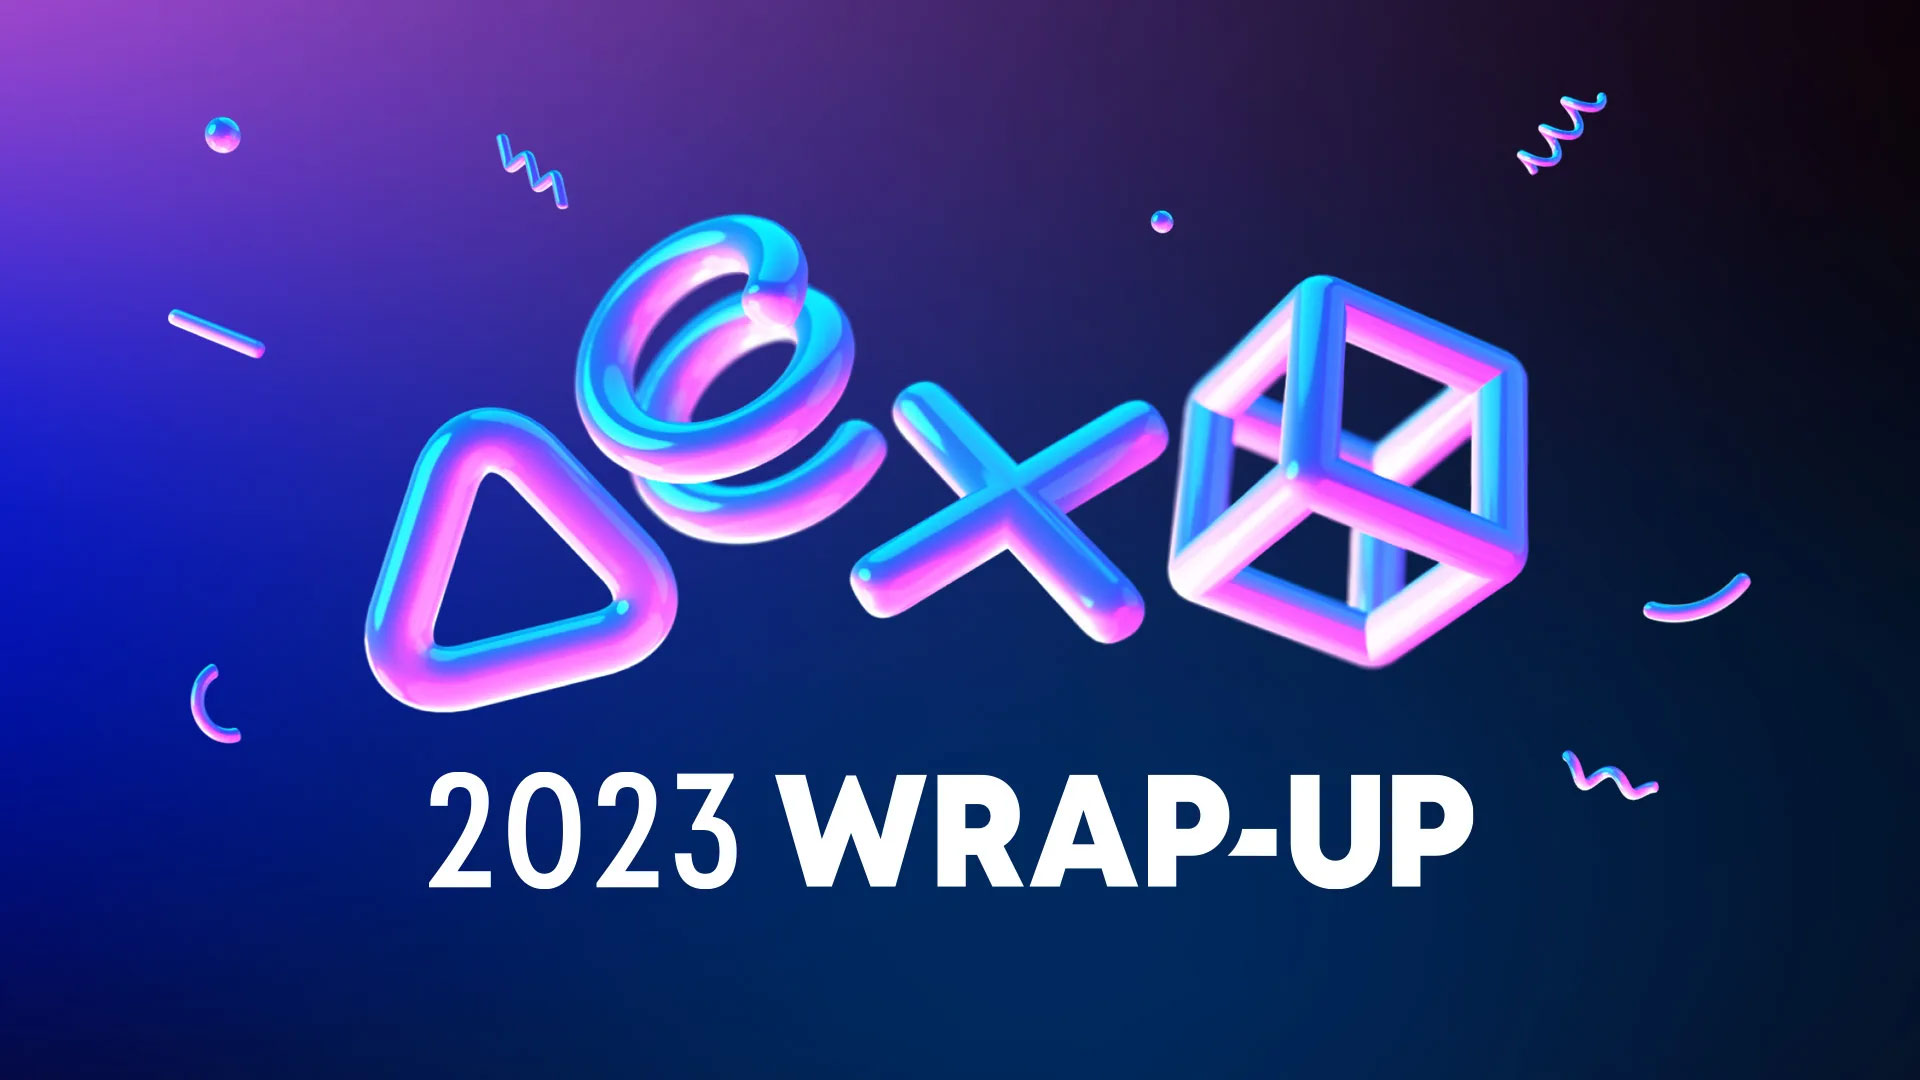 Get a unique avatar and digital collectible by checking out your 2023 PlayStation Wrap-Up.